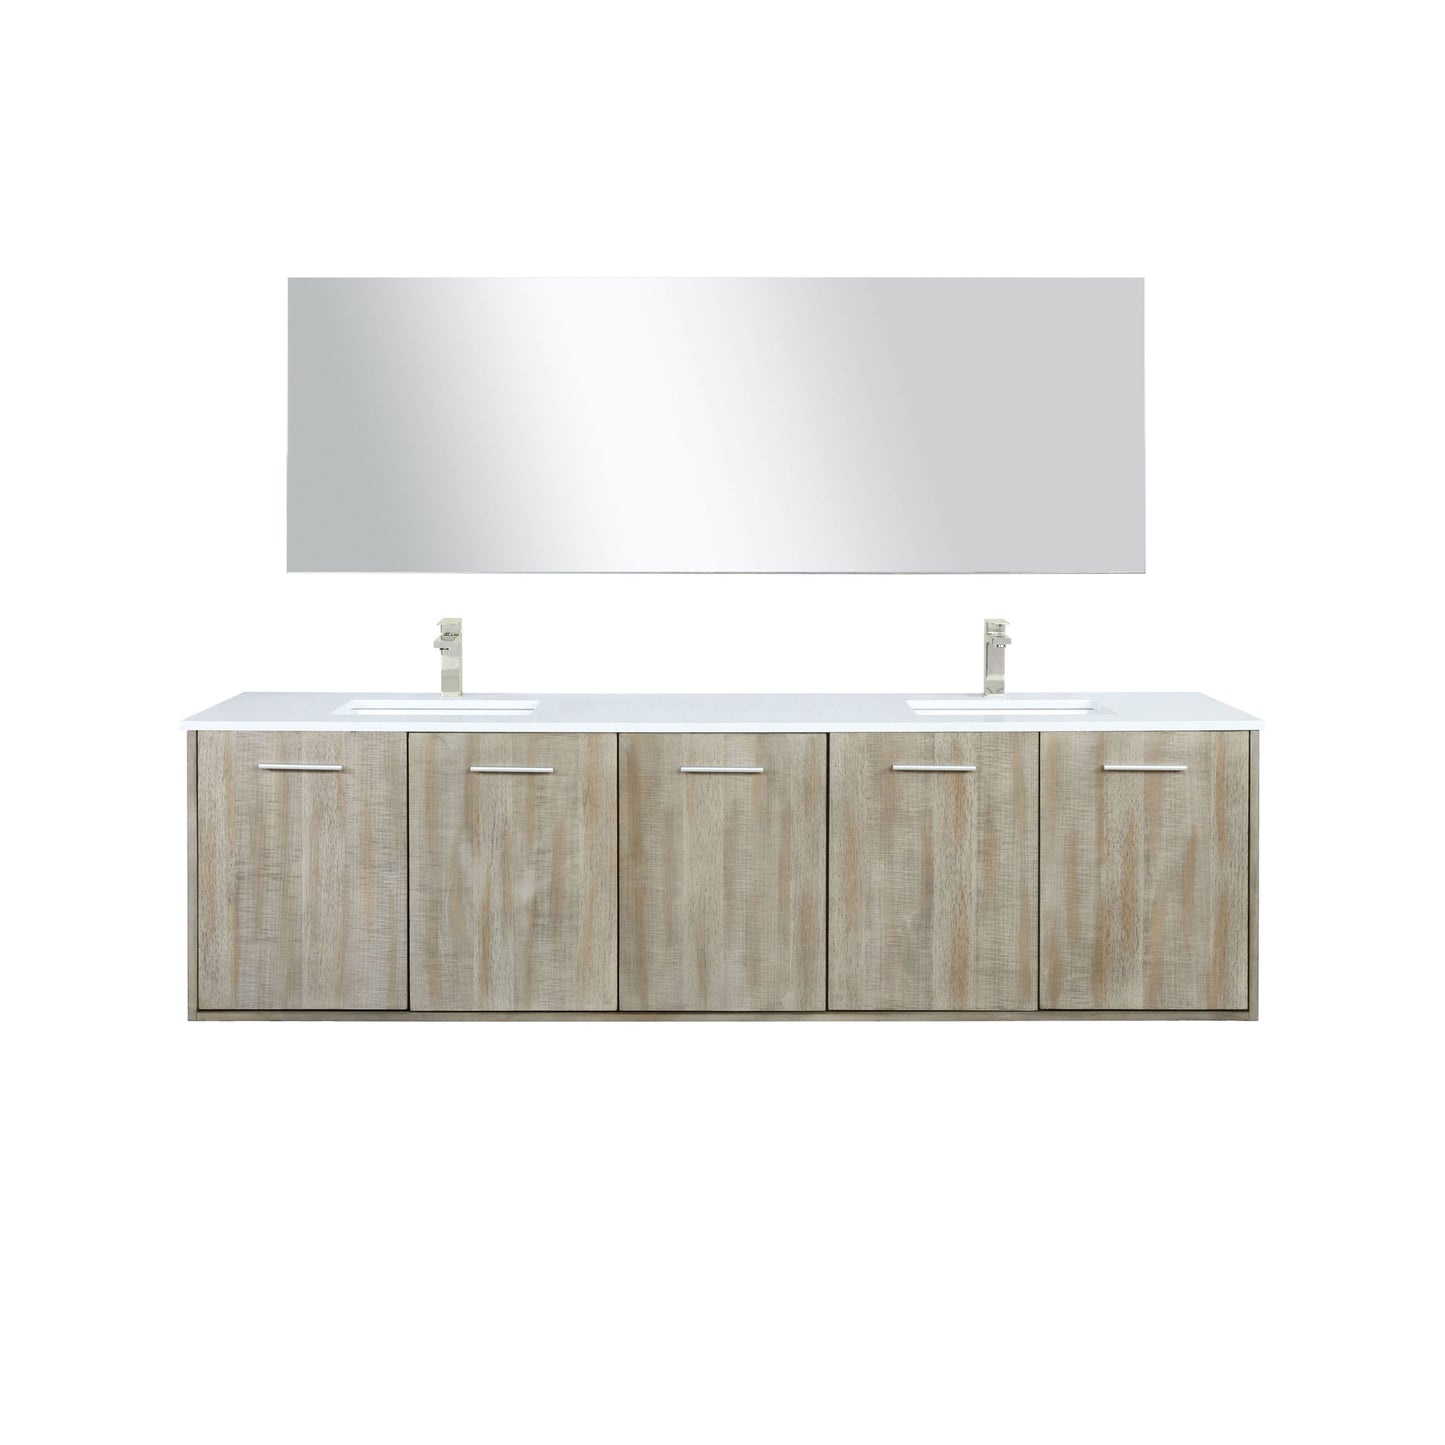 Lexora Collection Fairbanks 80 inch Rustic Acacia Double Bath Vanity, Cultured Marble Top, Faucet Set and 70 inch Mirror - Luxe Bathroom Vanities